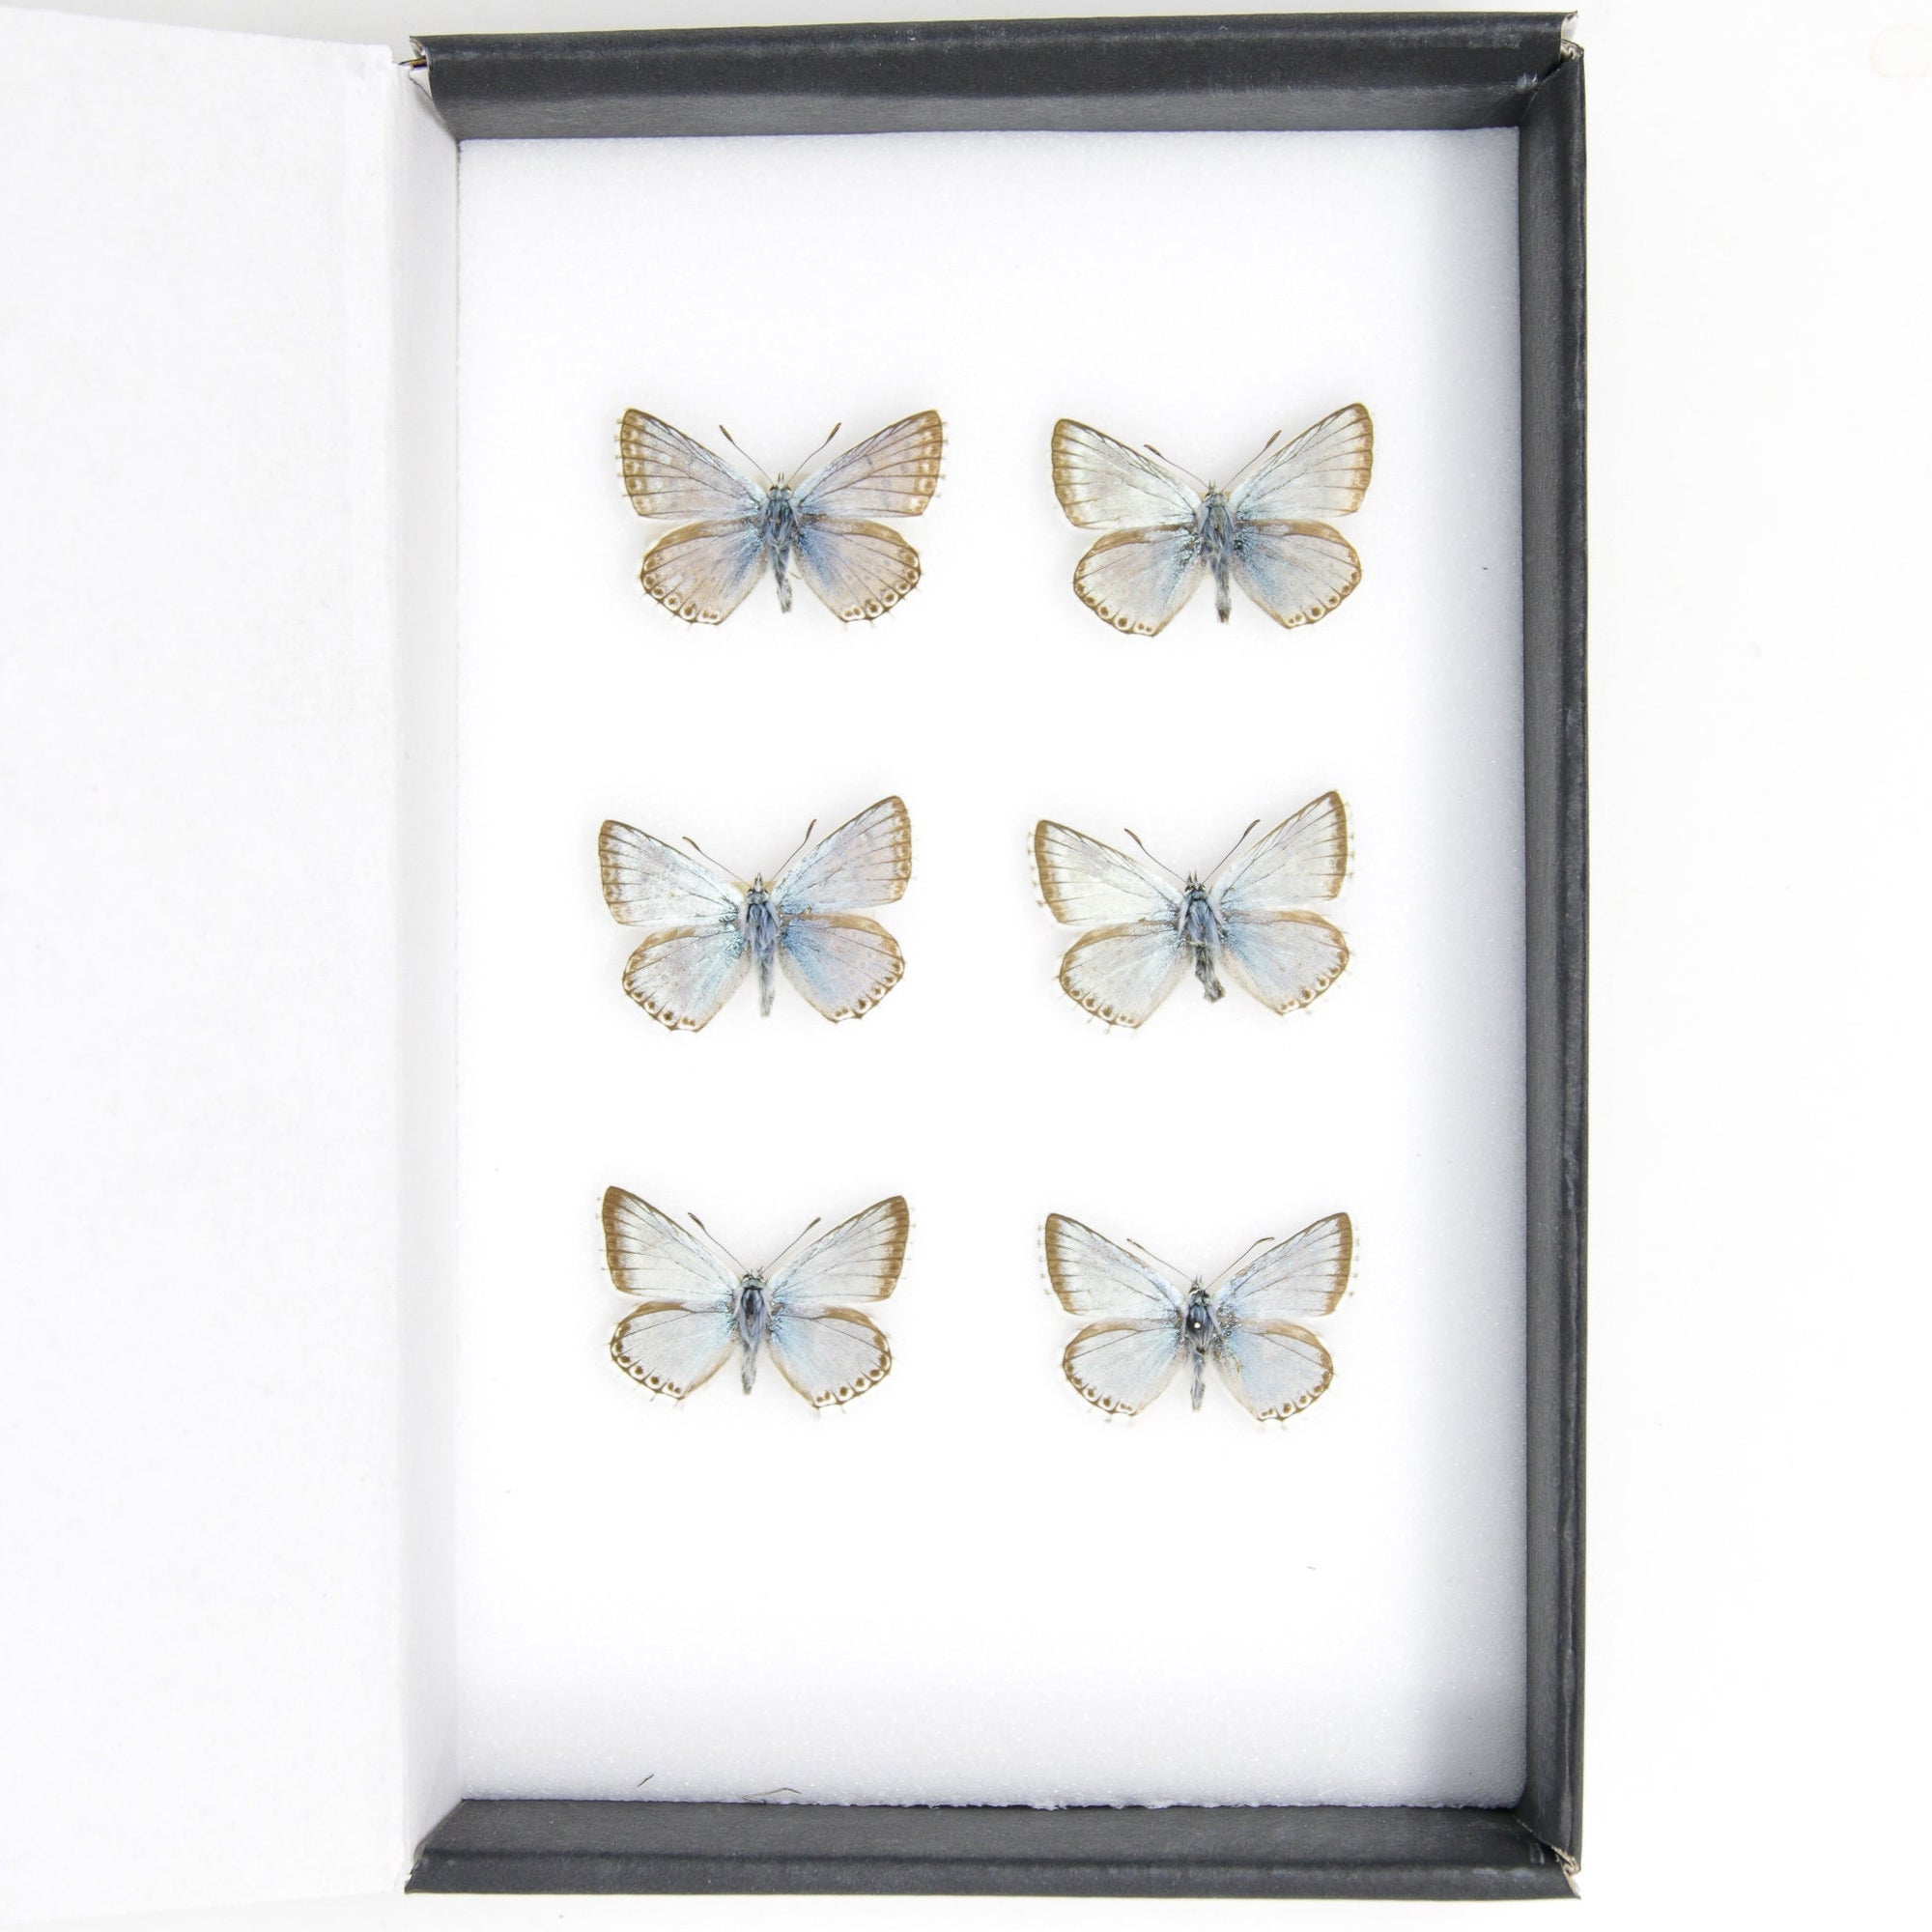 A Collection of Chalkhill Blue Butterflies (Lysandra coridon) with Scientific Collection Data, A1 Quality, Real Lepidoptera Specimens #SE02